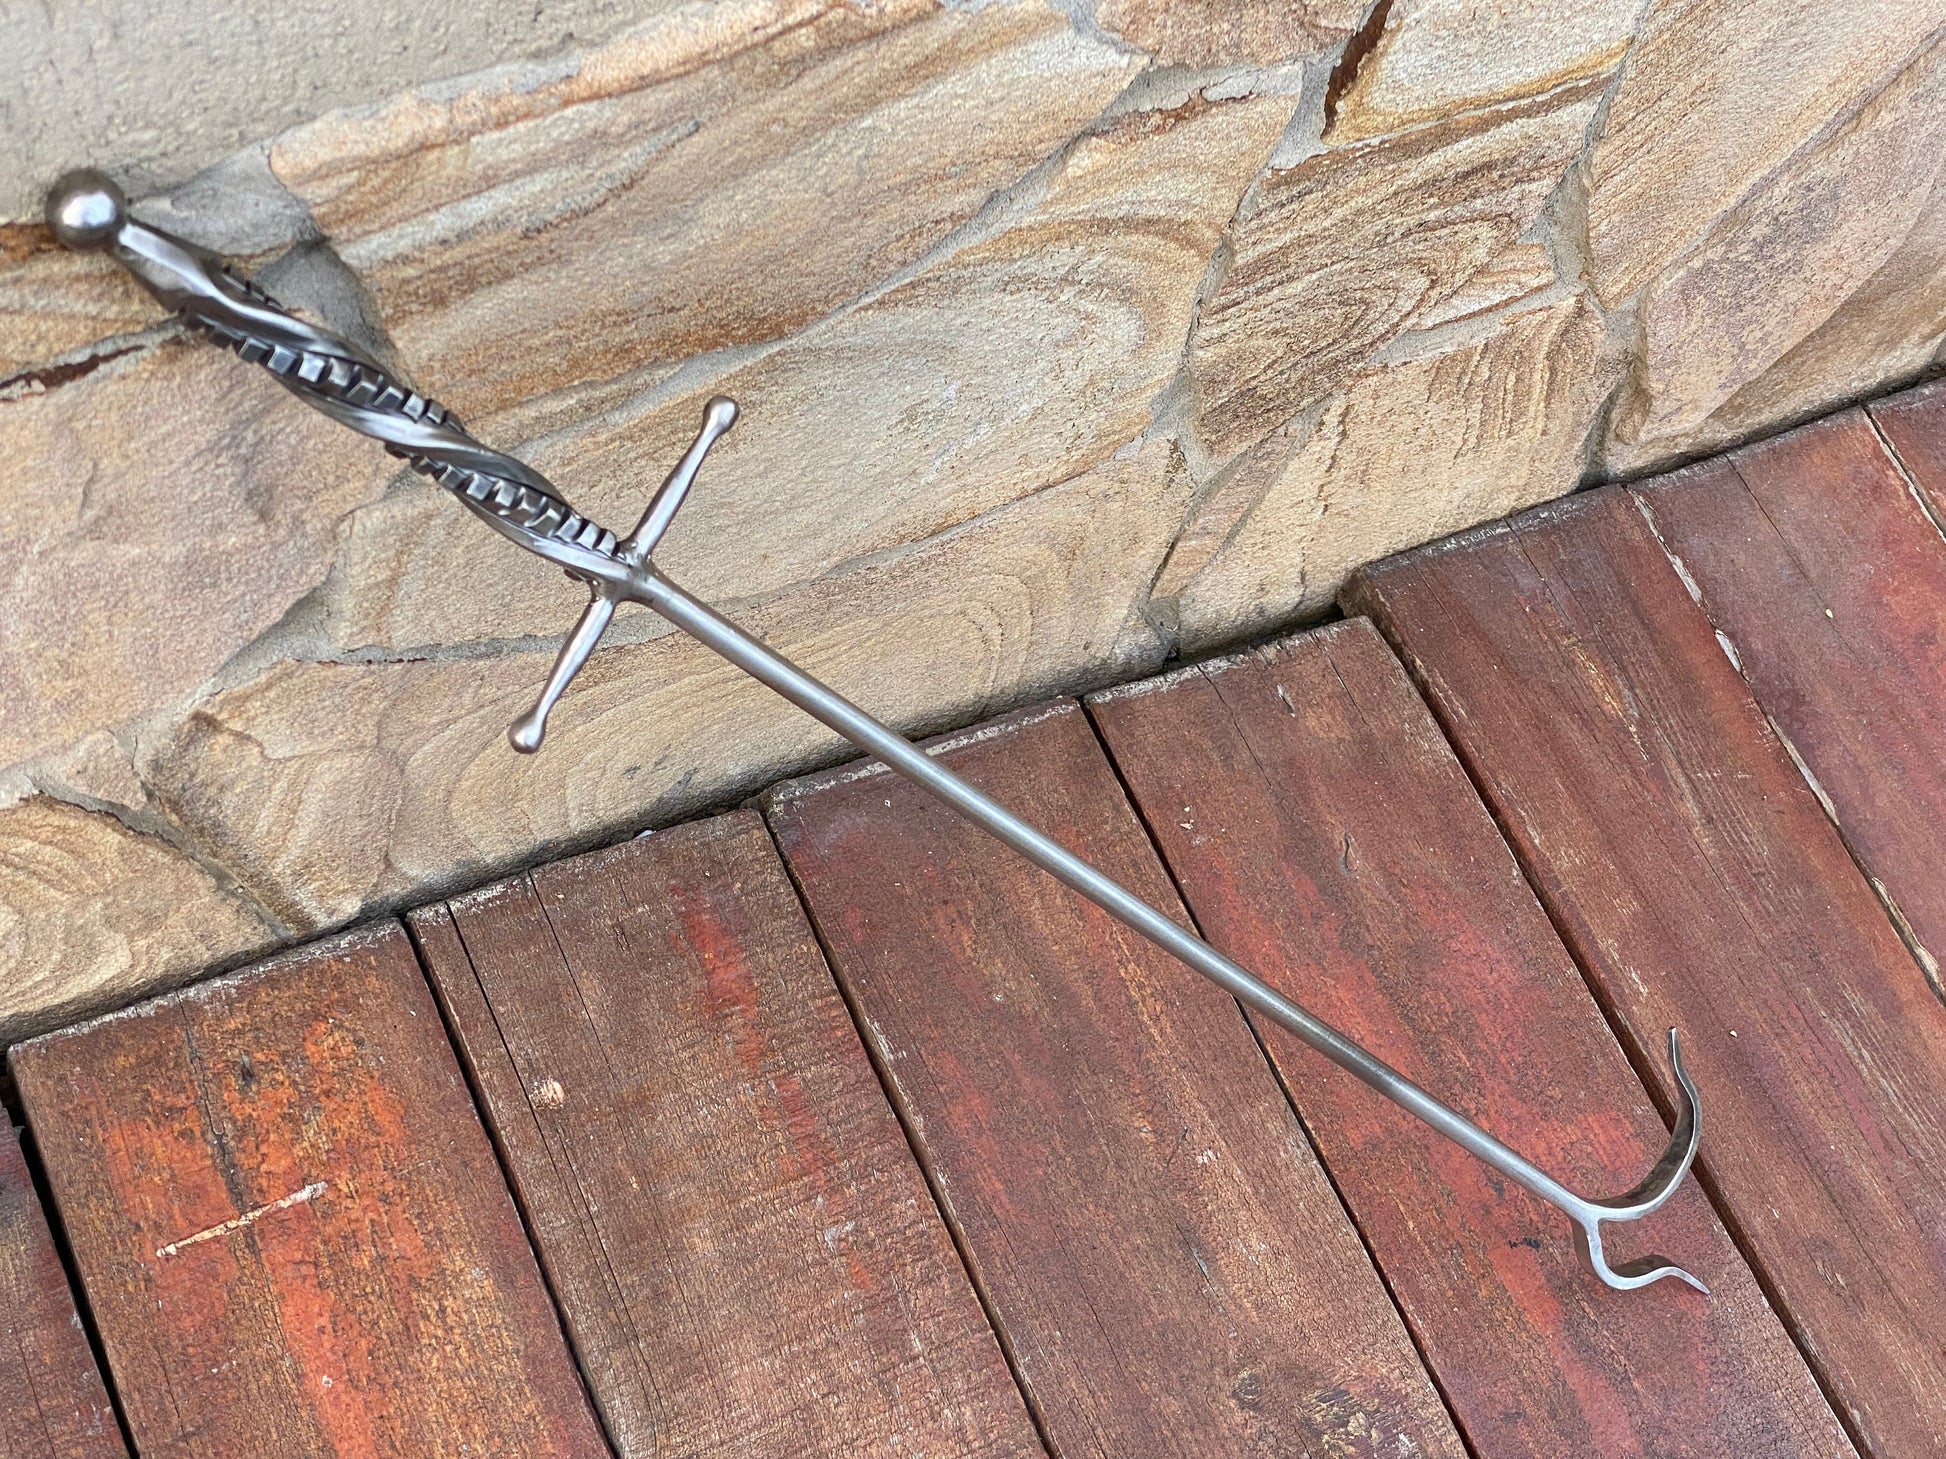 Custom listing: stainless steel fire poker, urgent order, shipped by UPS Express